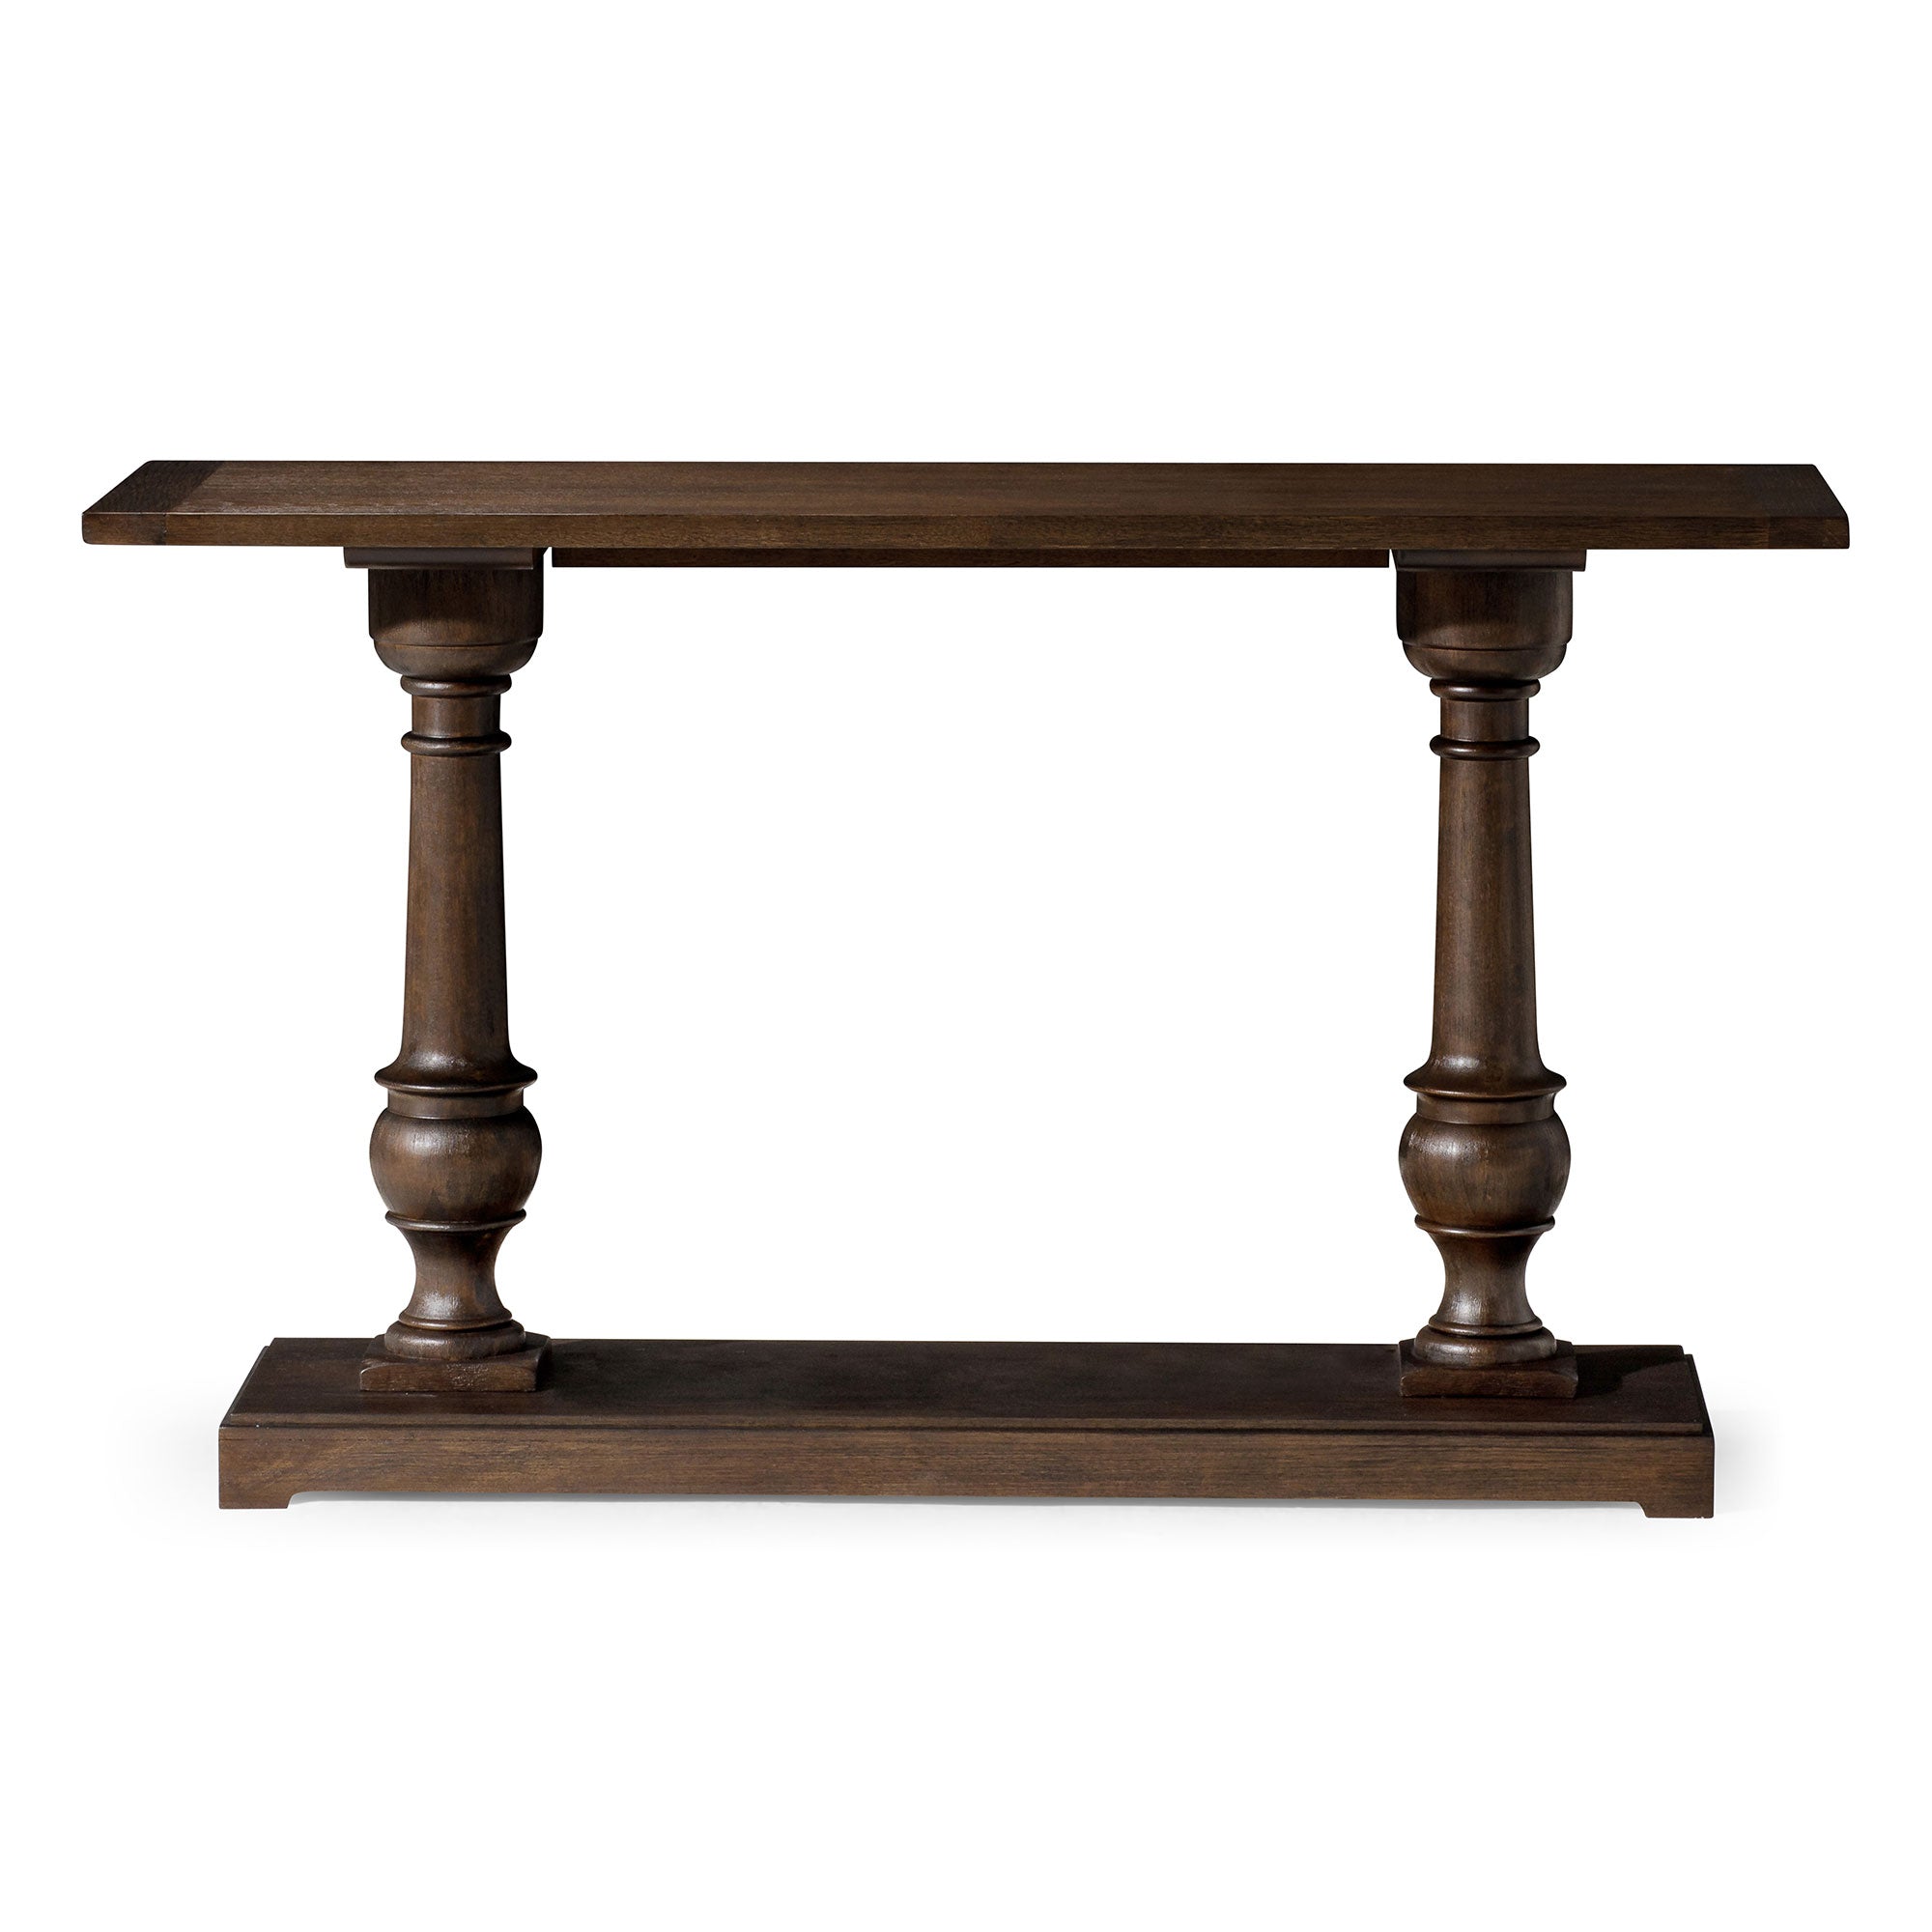 Arthur Traditional Wooden Console Table in Antiqued Brown Finish